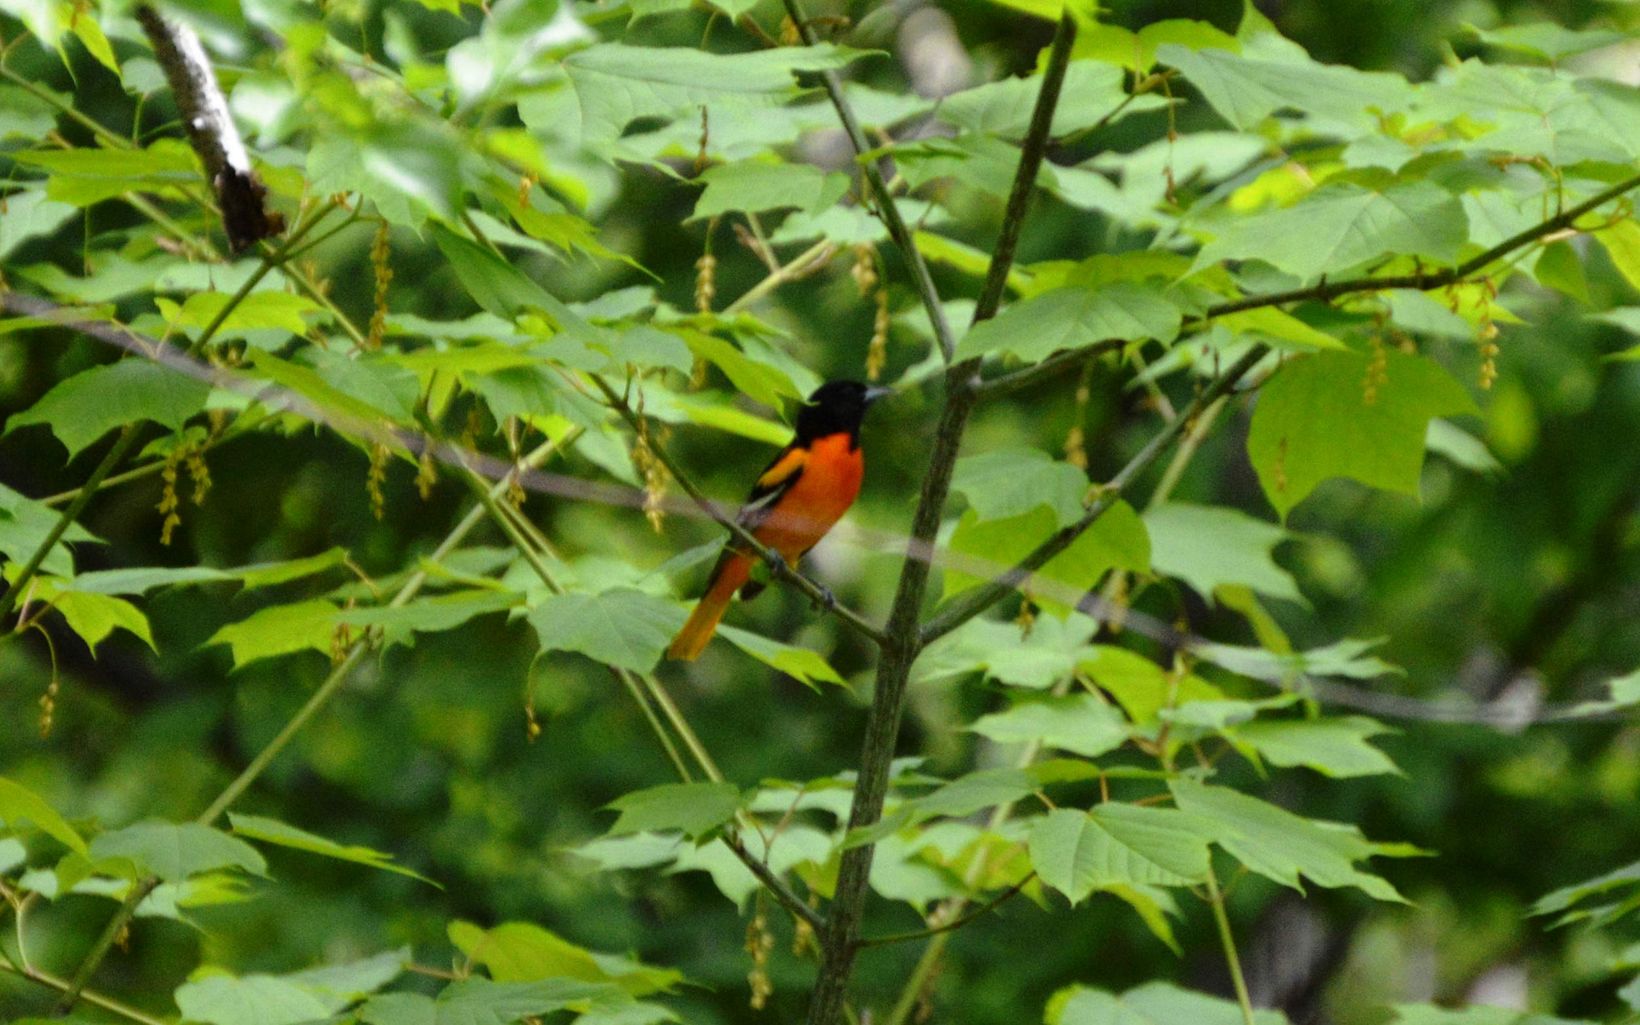 
                
                  Baltimore Oriole A Baltimore Oriole rests in a tree at the Hamer Woodlands at Cove Mountain.
                  © Shawn Hickey/The Nature Conservancy
                
              